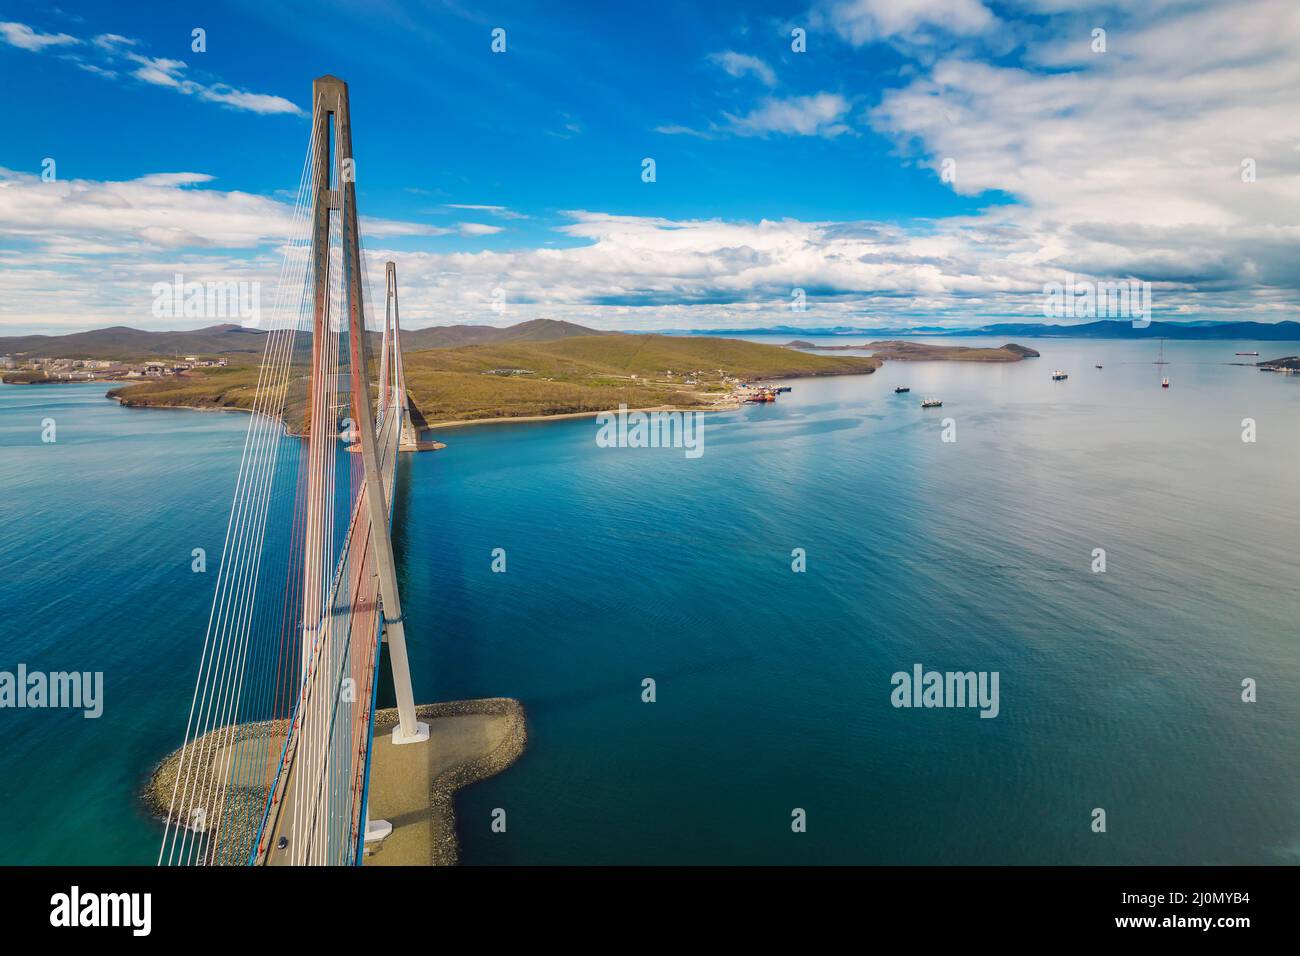 Aerial view of famous cable-stayed bridge to Russky island from Vladivostok city in Far East of Russia Stock Photo